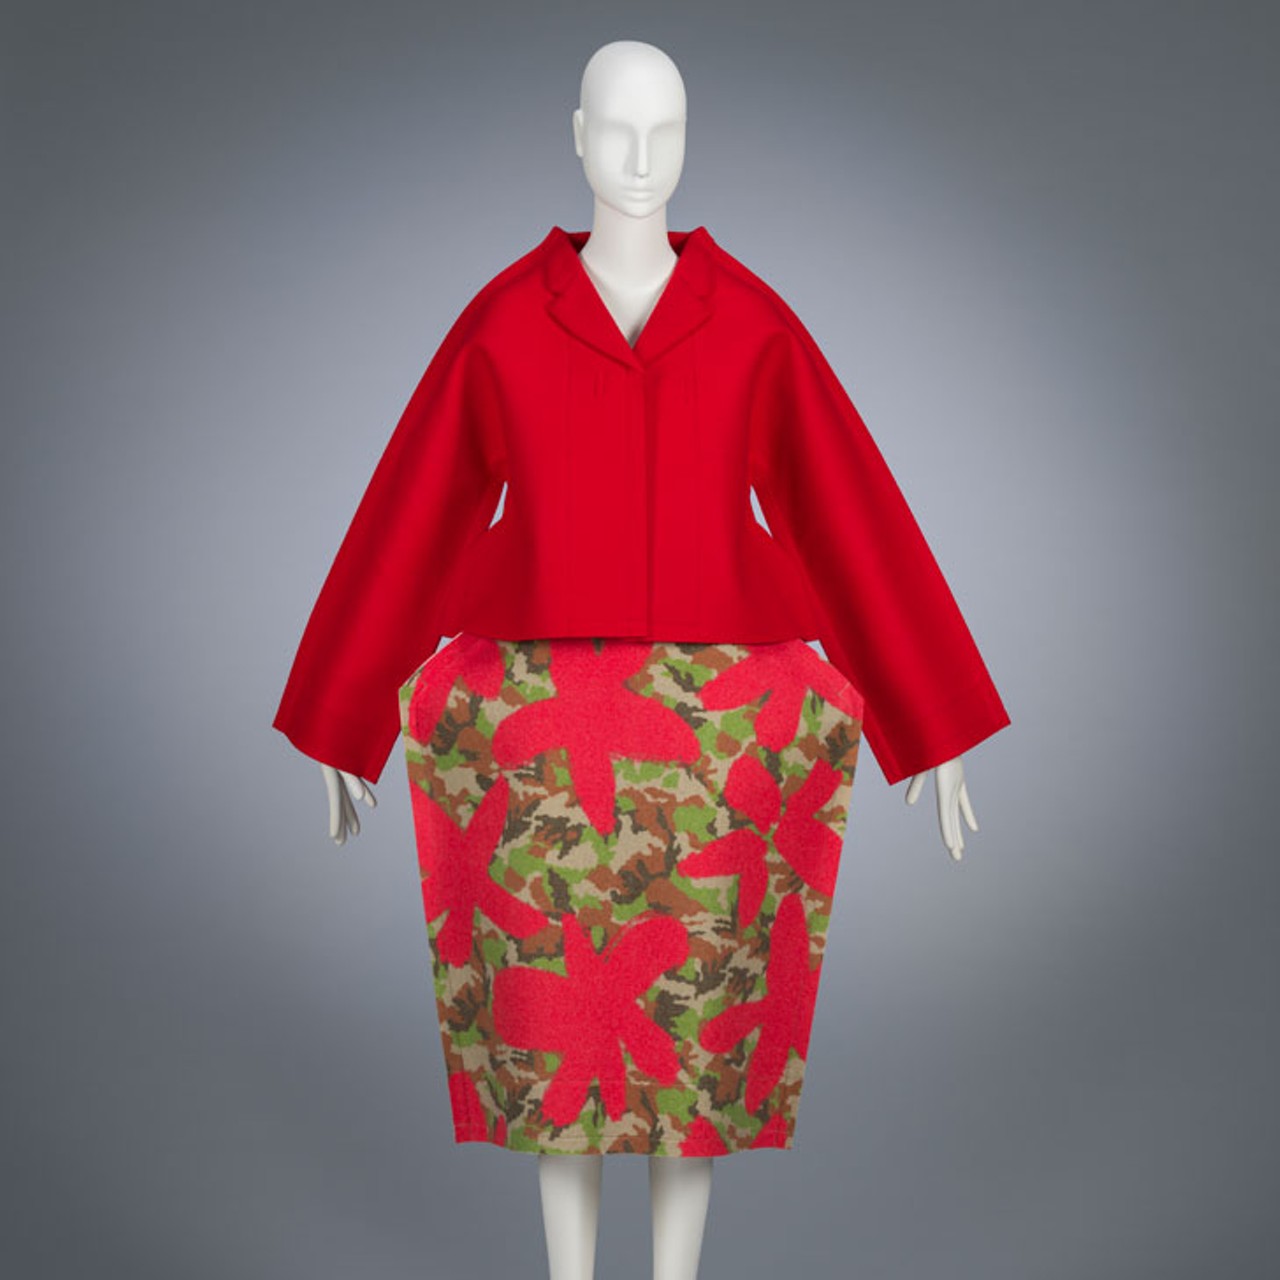 Rei Kawakubo for Comme des Gar?ons, Fall 2012
Cincinnati Art Museum; Museum Purchase: Lawrence Archer Wachs Trust, The Cynthea J. Bogel Collection
Photo by Rob Deslongchamps